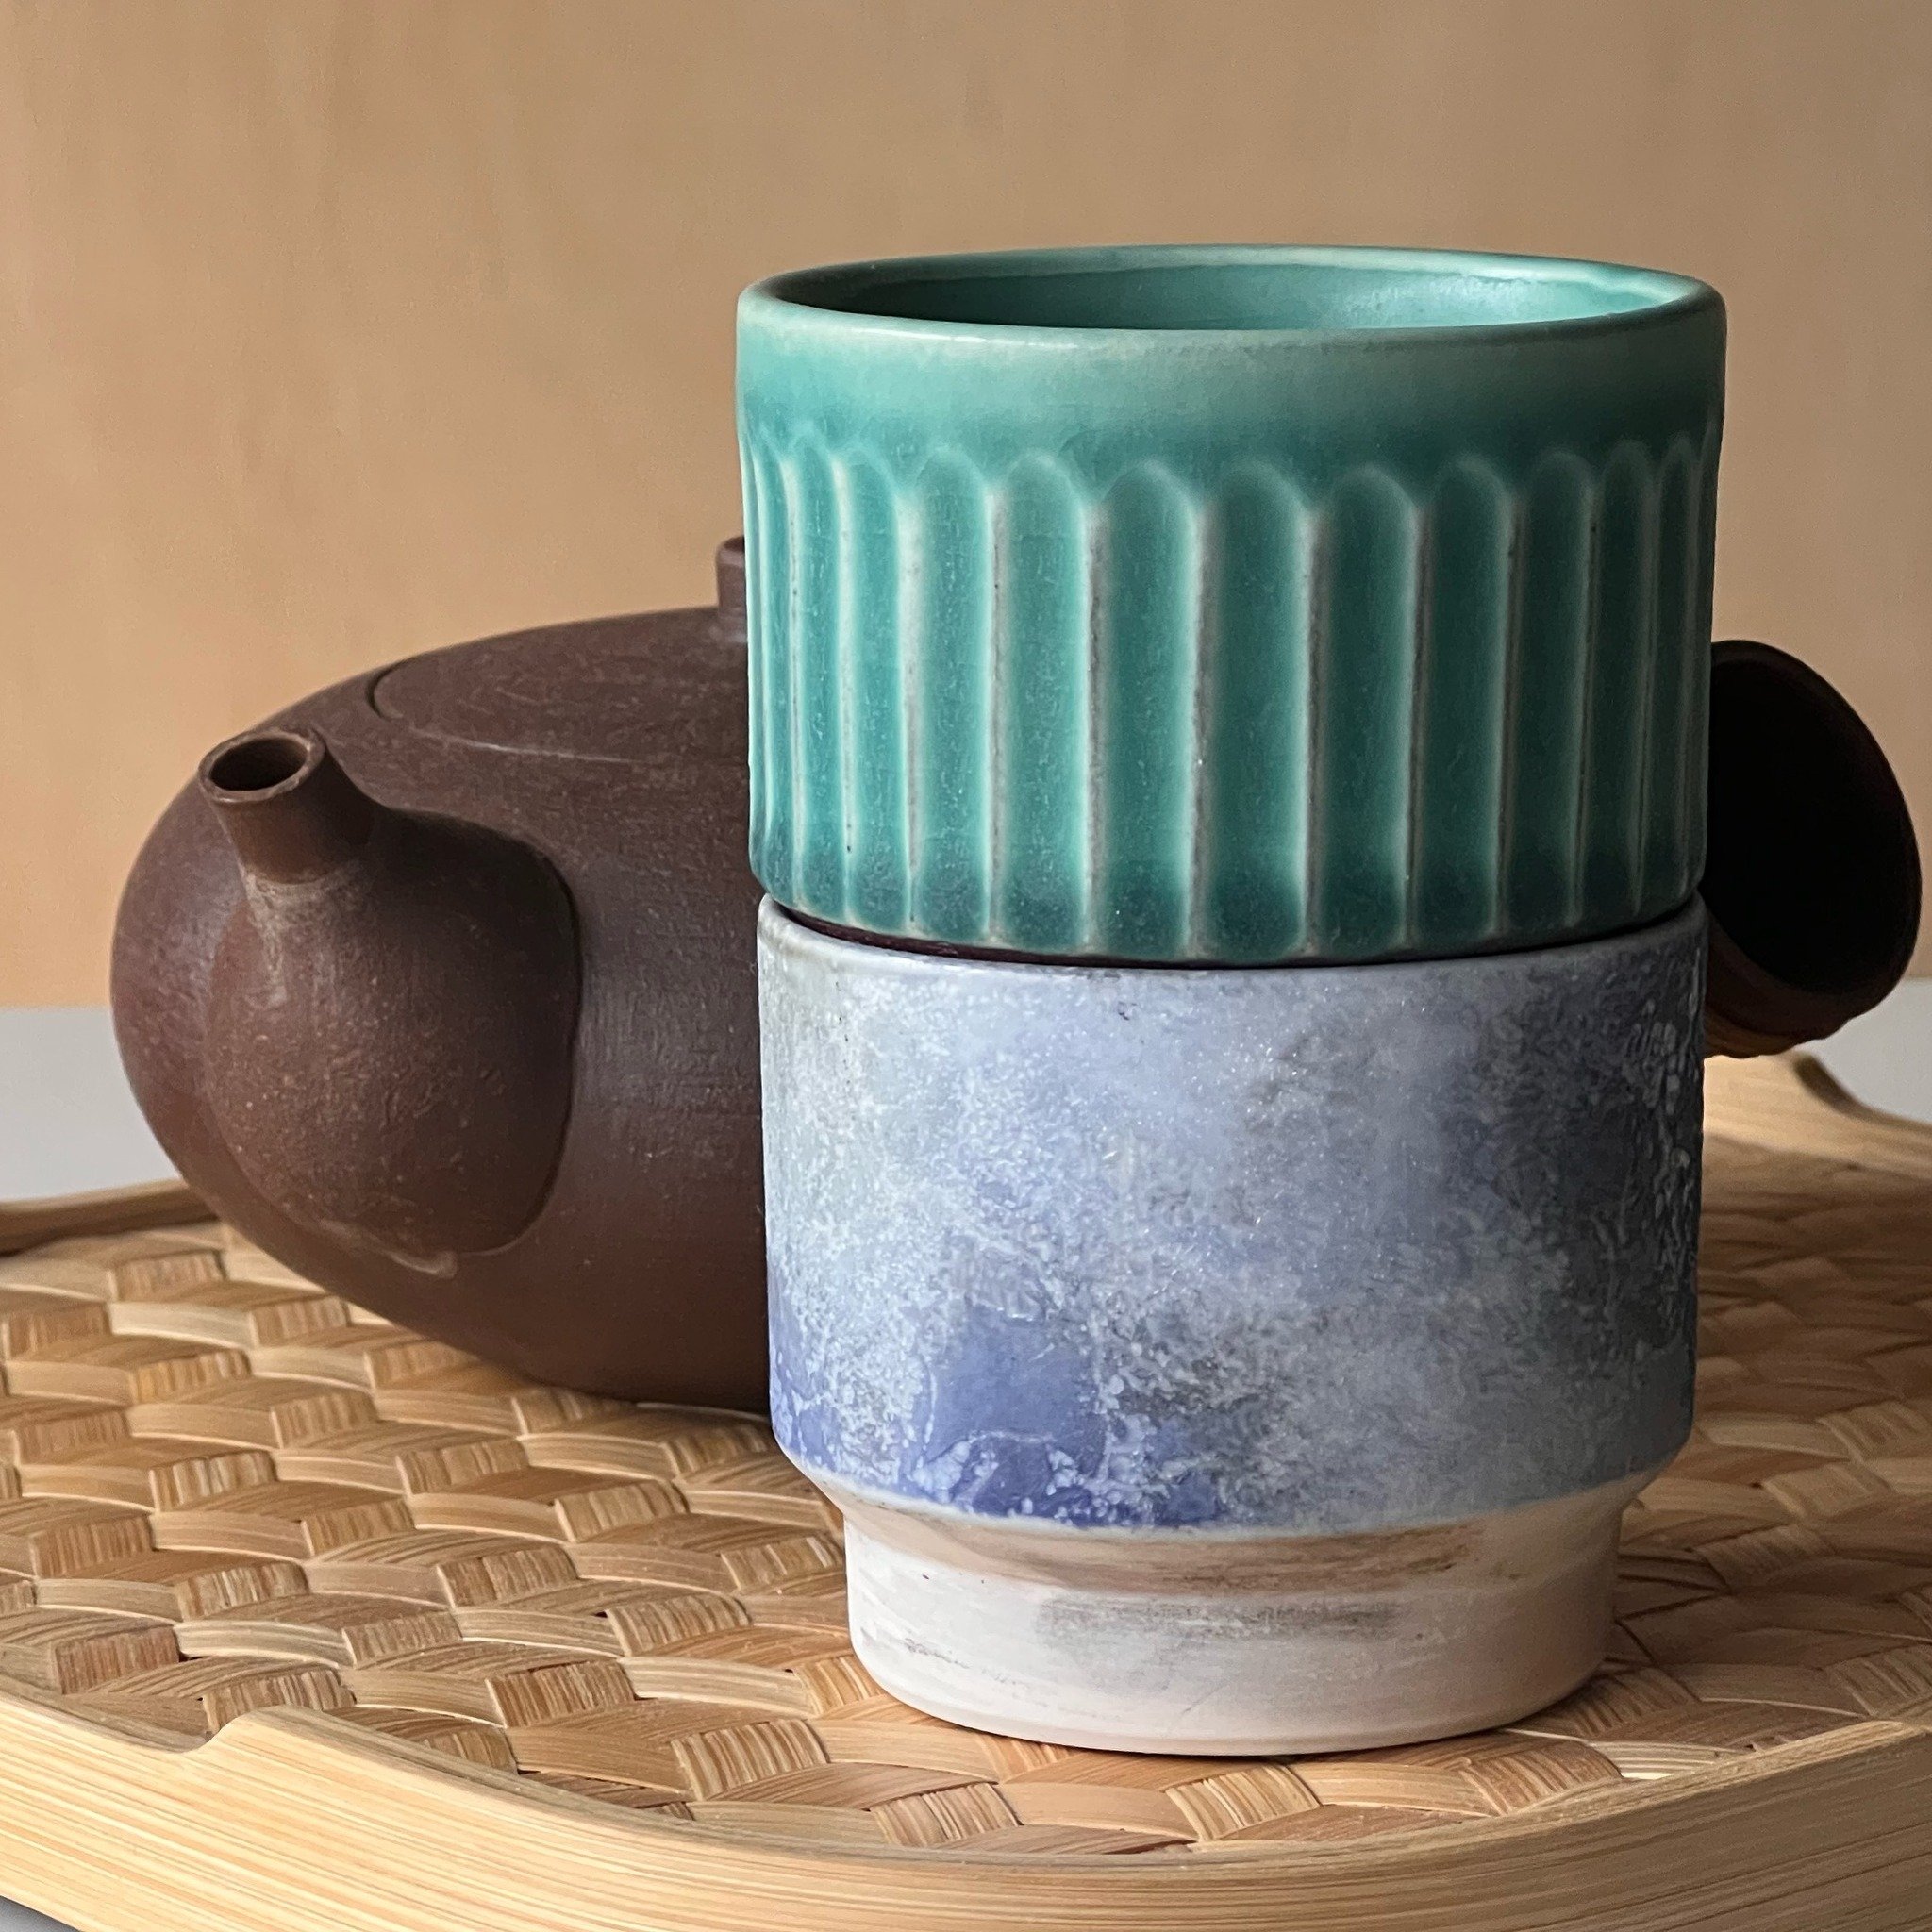 Serene blue Kasama-yaki porcelain cup meets vibrant turquoise Tanba-yaki ceramic cup. Their textures and hues create a symphony of sophistication, perfectly complemented by the organic charm of our &lsquo;Studio Dapur&rsquo; bamboo tray. 

穏やかな青色の笠間焼